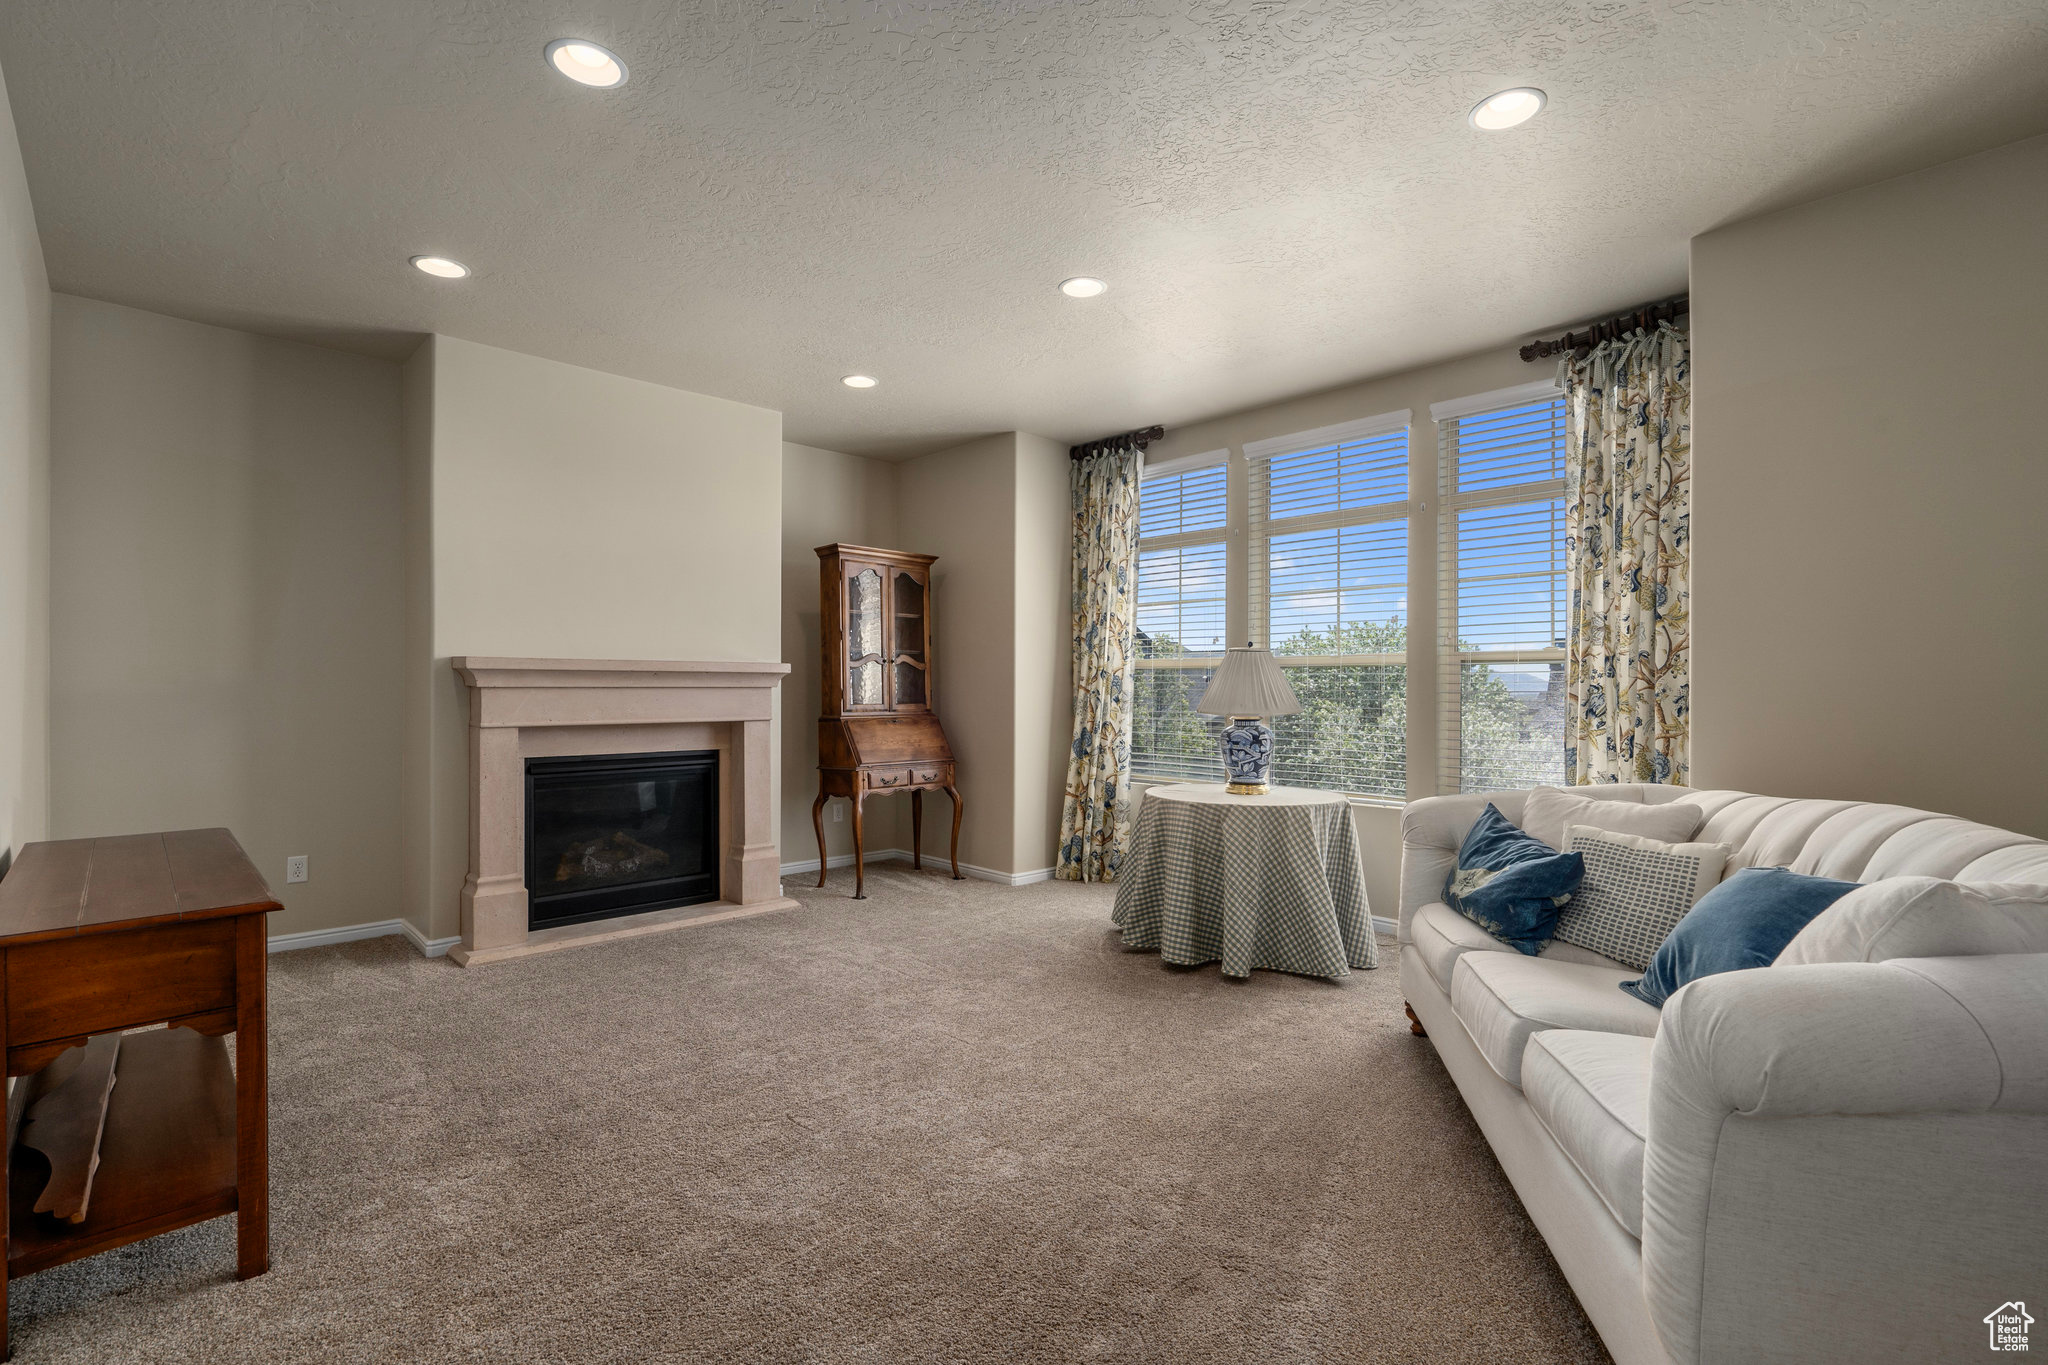 Living room featuring a textured ceiling and carpet flooring